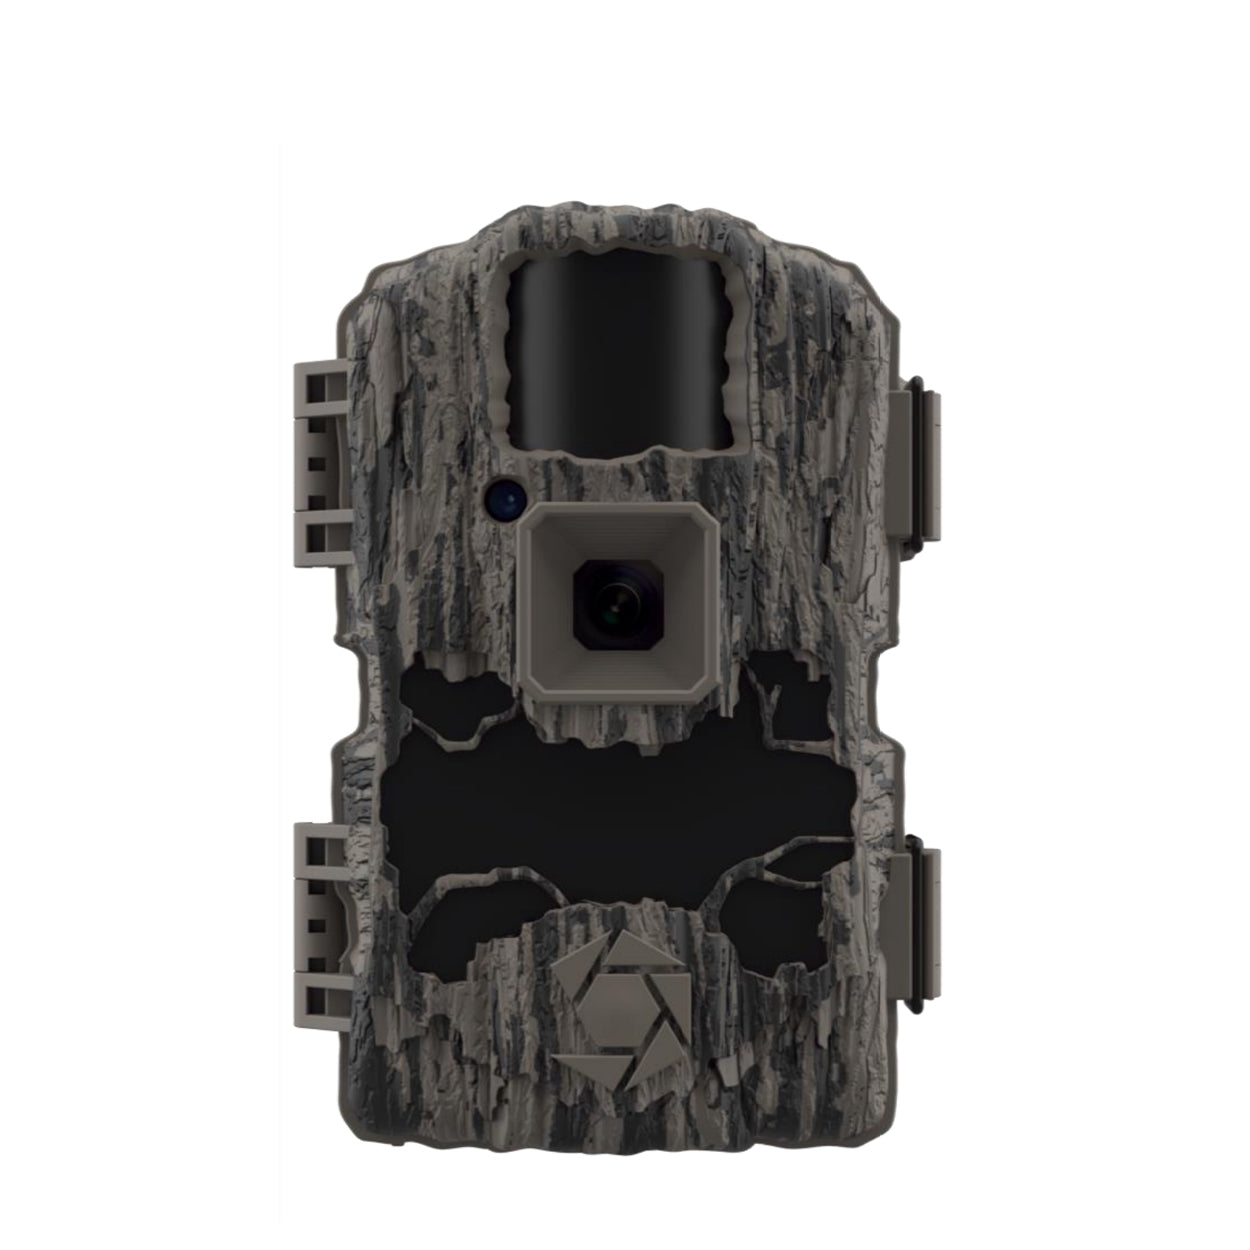 Stealthcam GMAX32V 32 Megapixel Trail Camera With 1080 Video